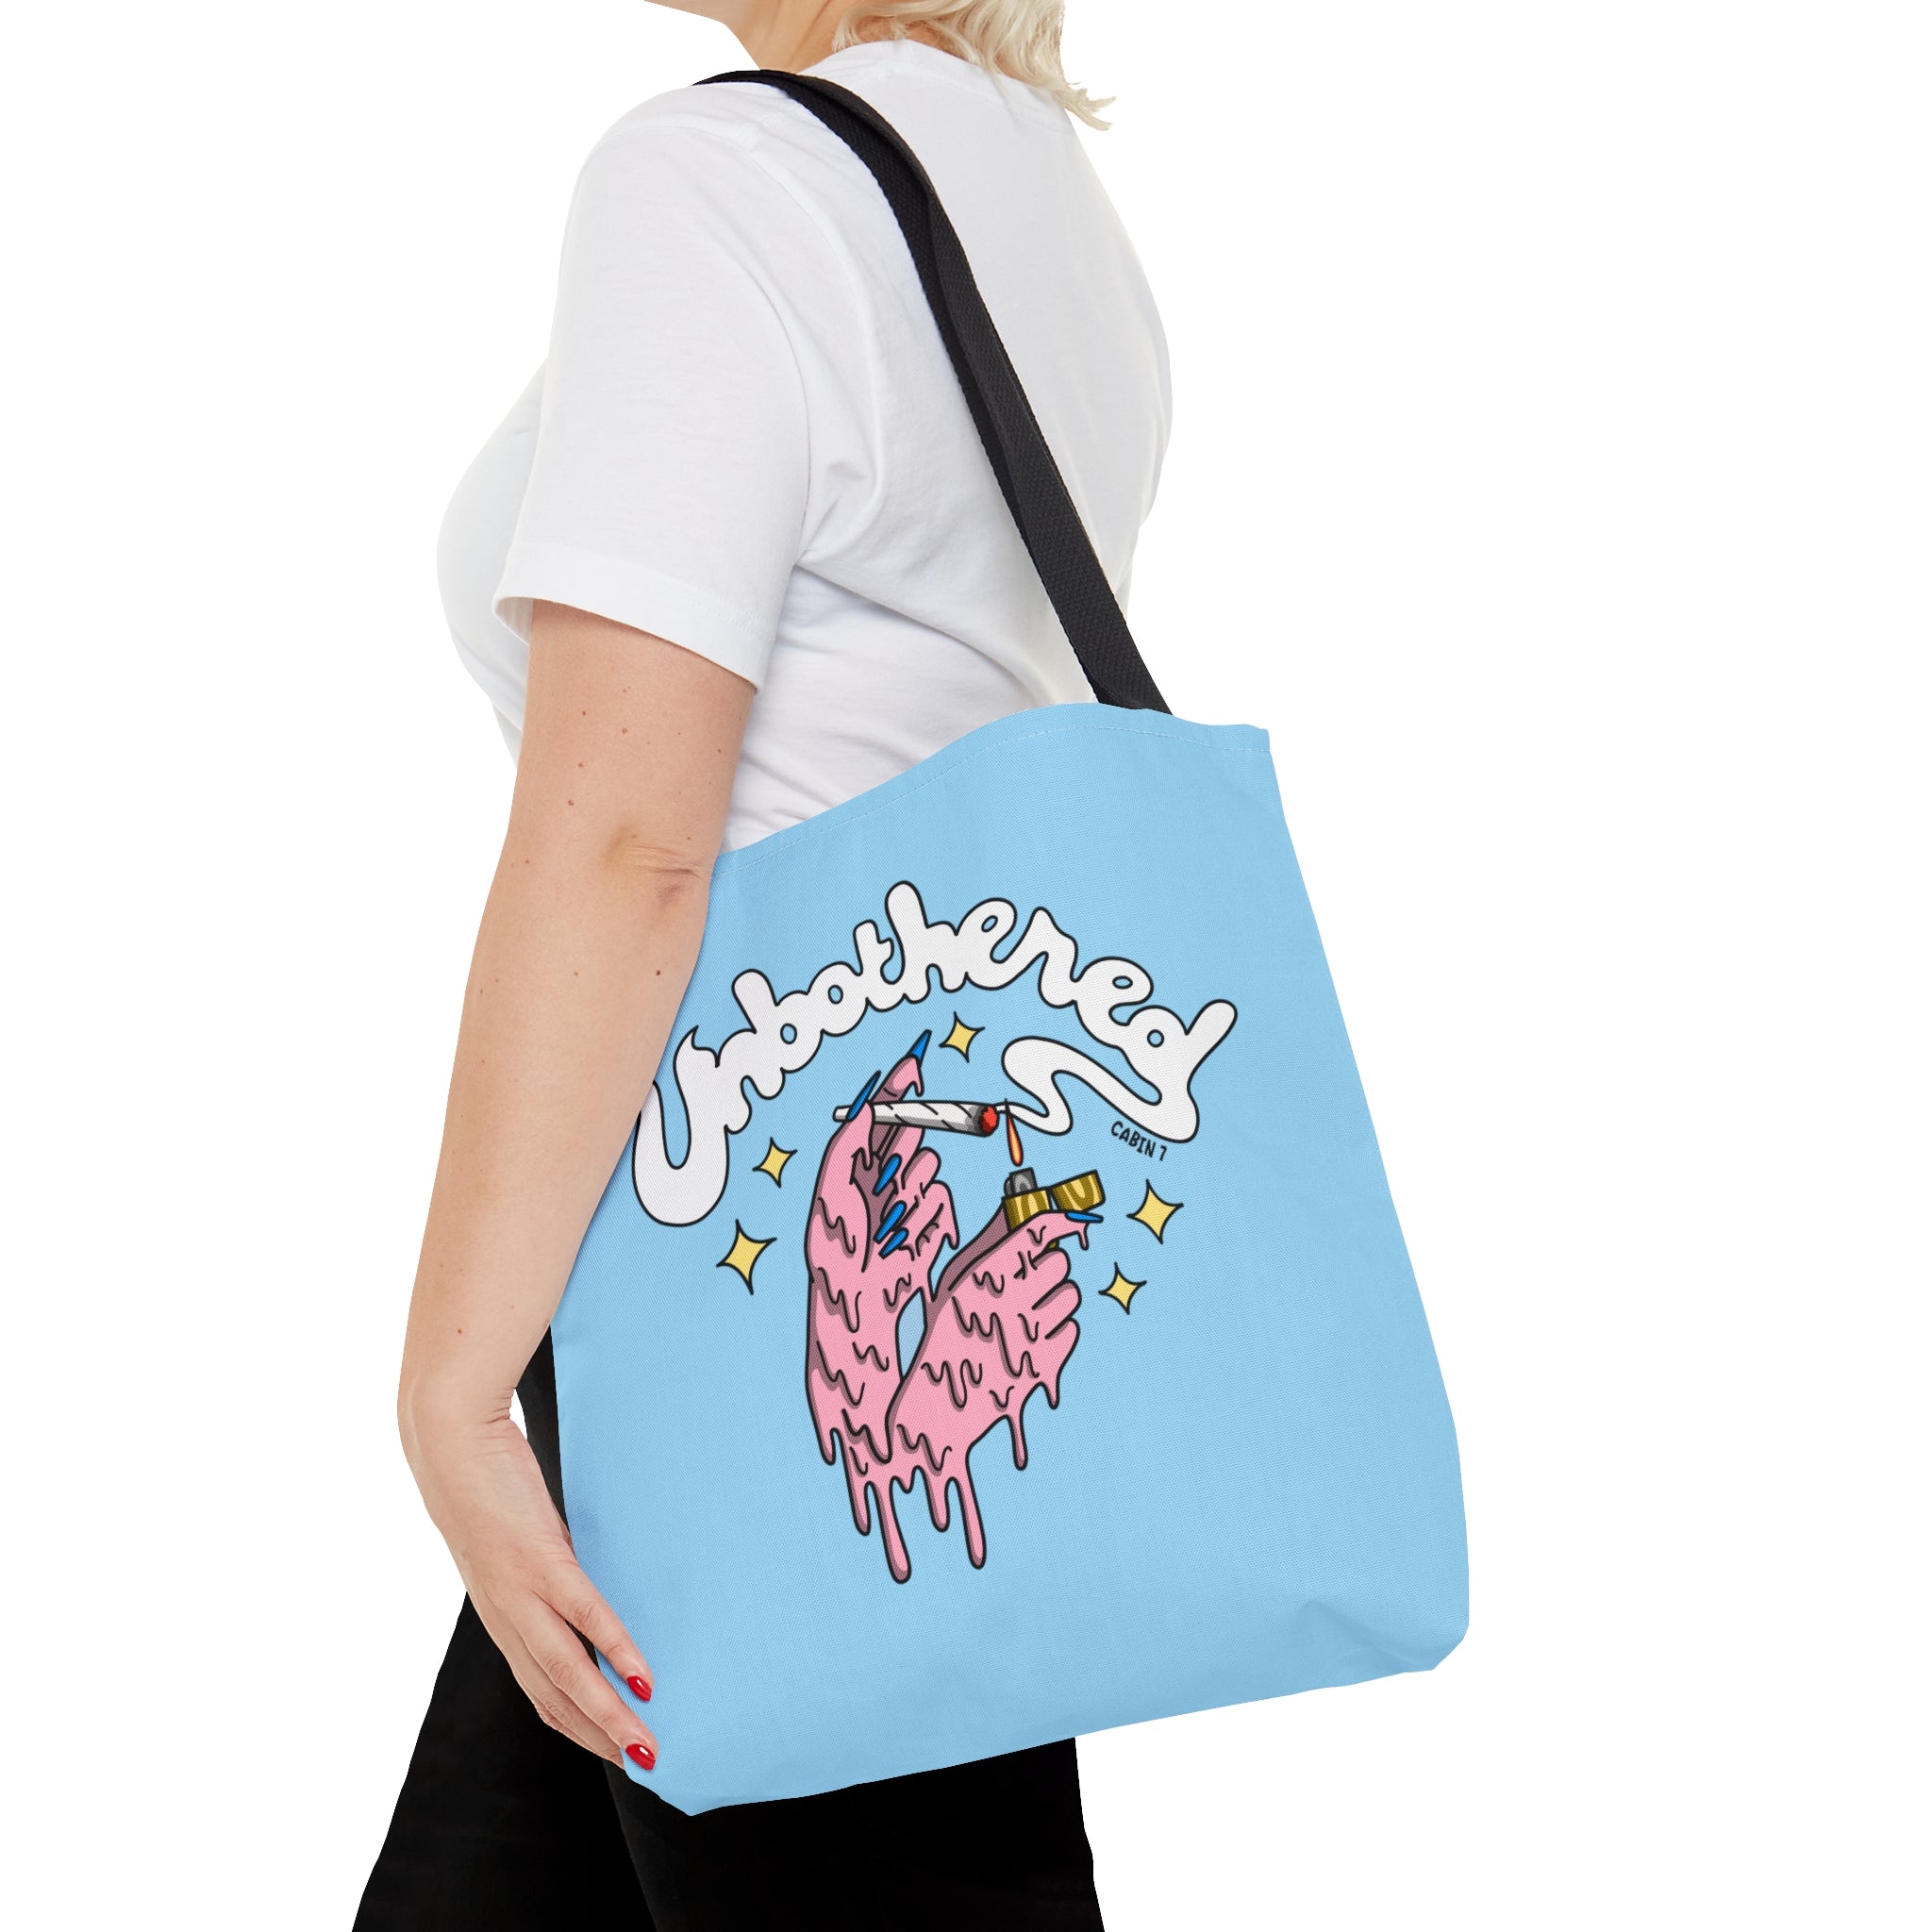 Unbothered Tote Bag